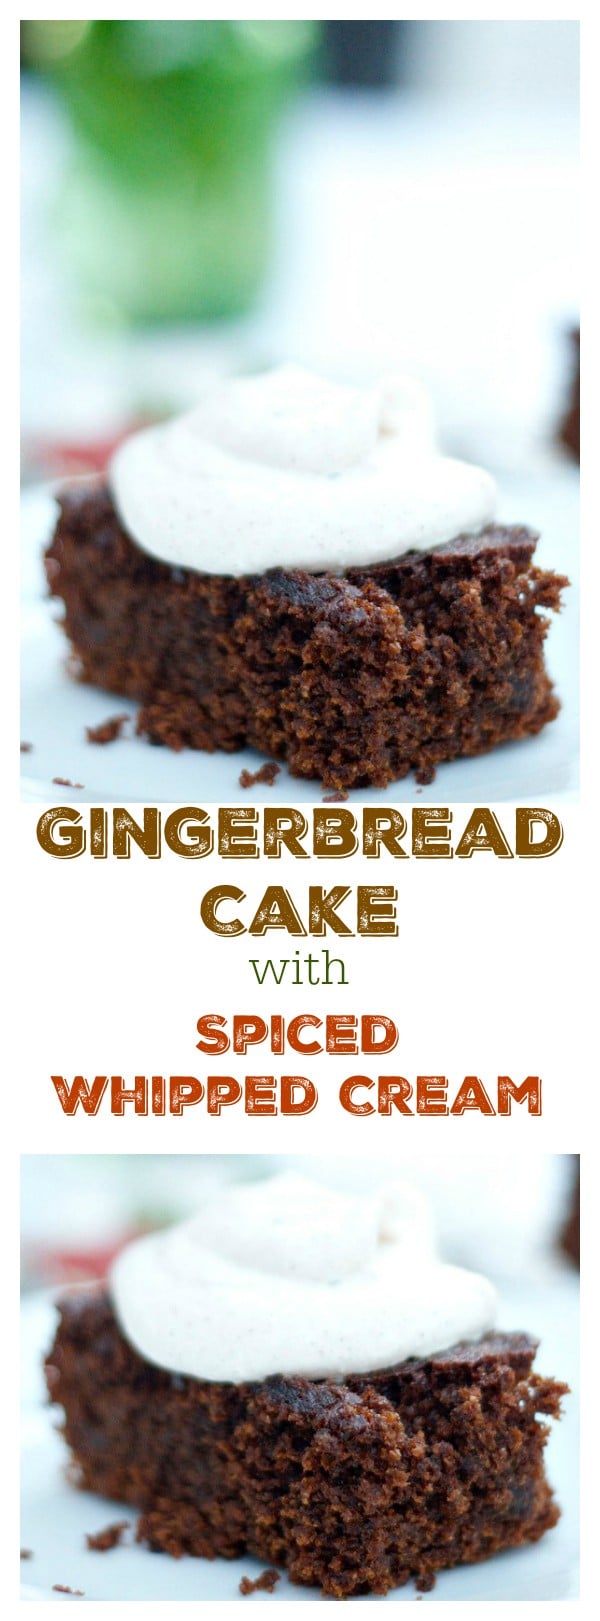 Light a fire, and have some friends over to enjoy a harvest-themed, special holiday dinner party with Gingerbread Cake with Spiced Whipped Cream for dessert!